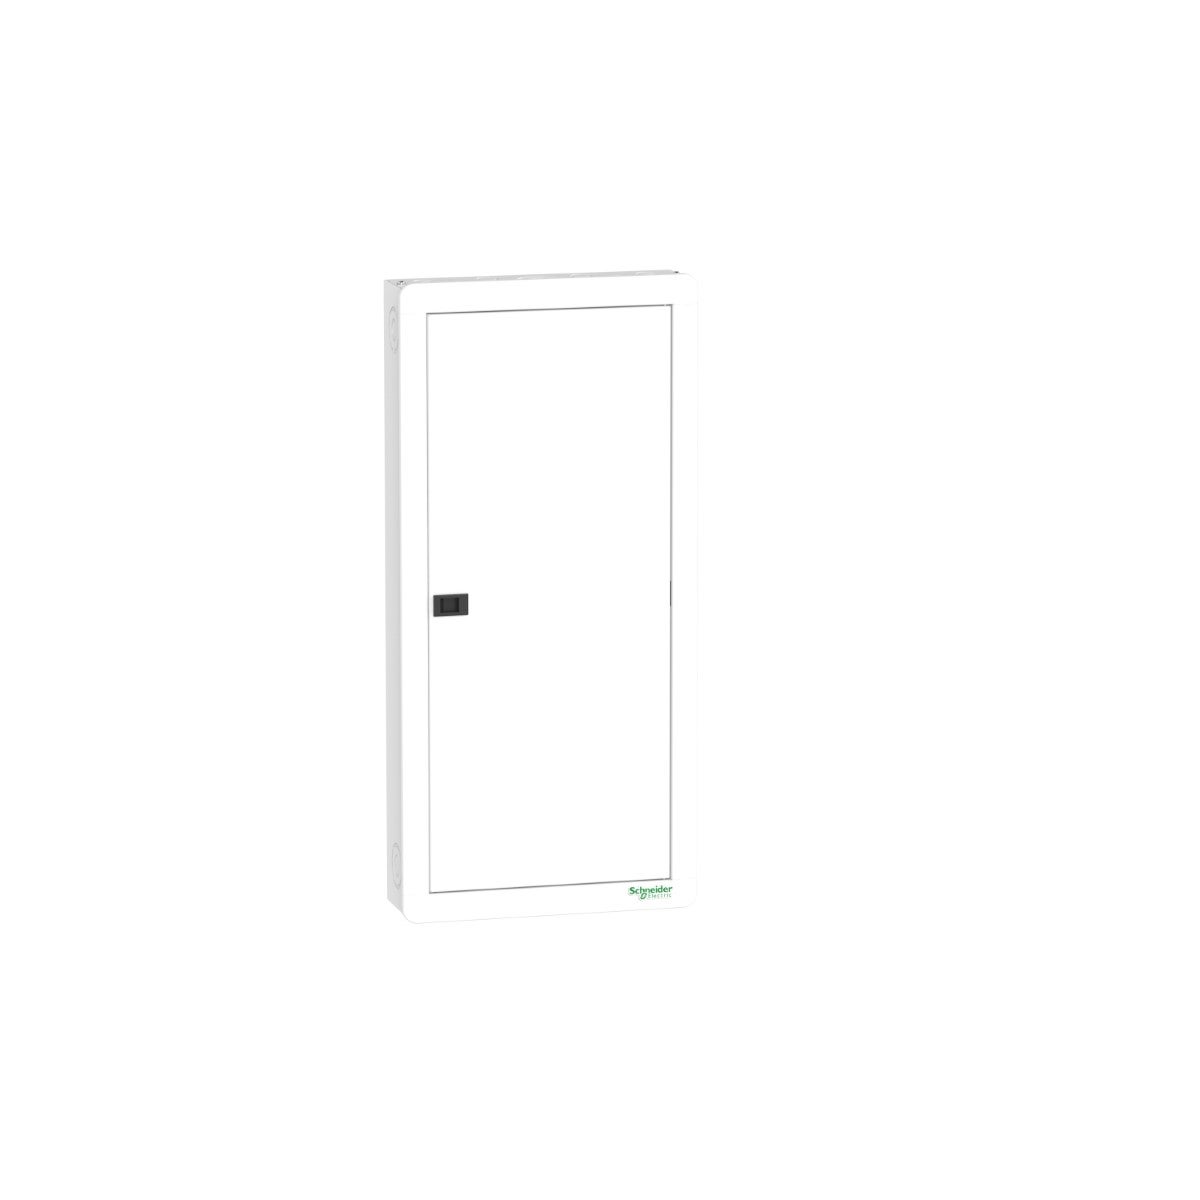 Distribution board, Acti9 Disbo, 64 ways, 125A, 4 row, surface mount